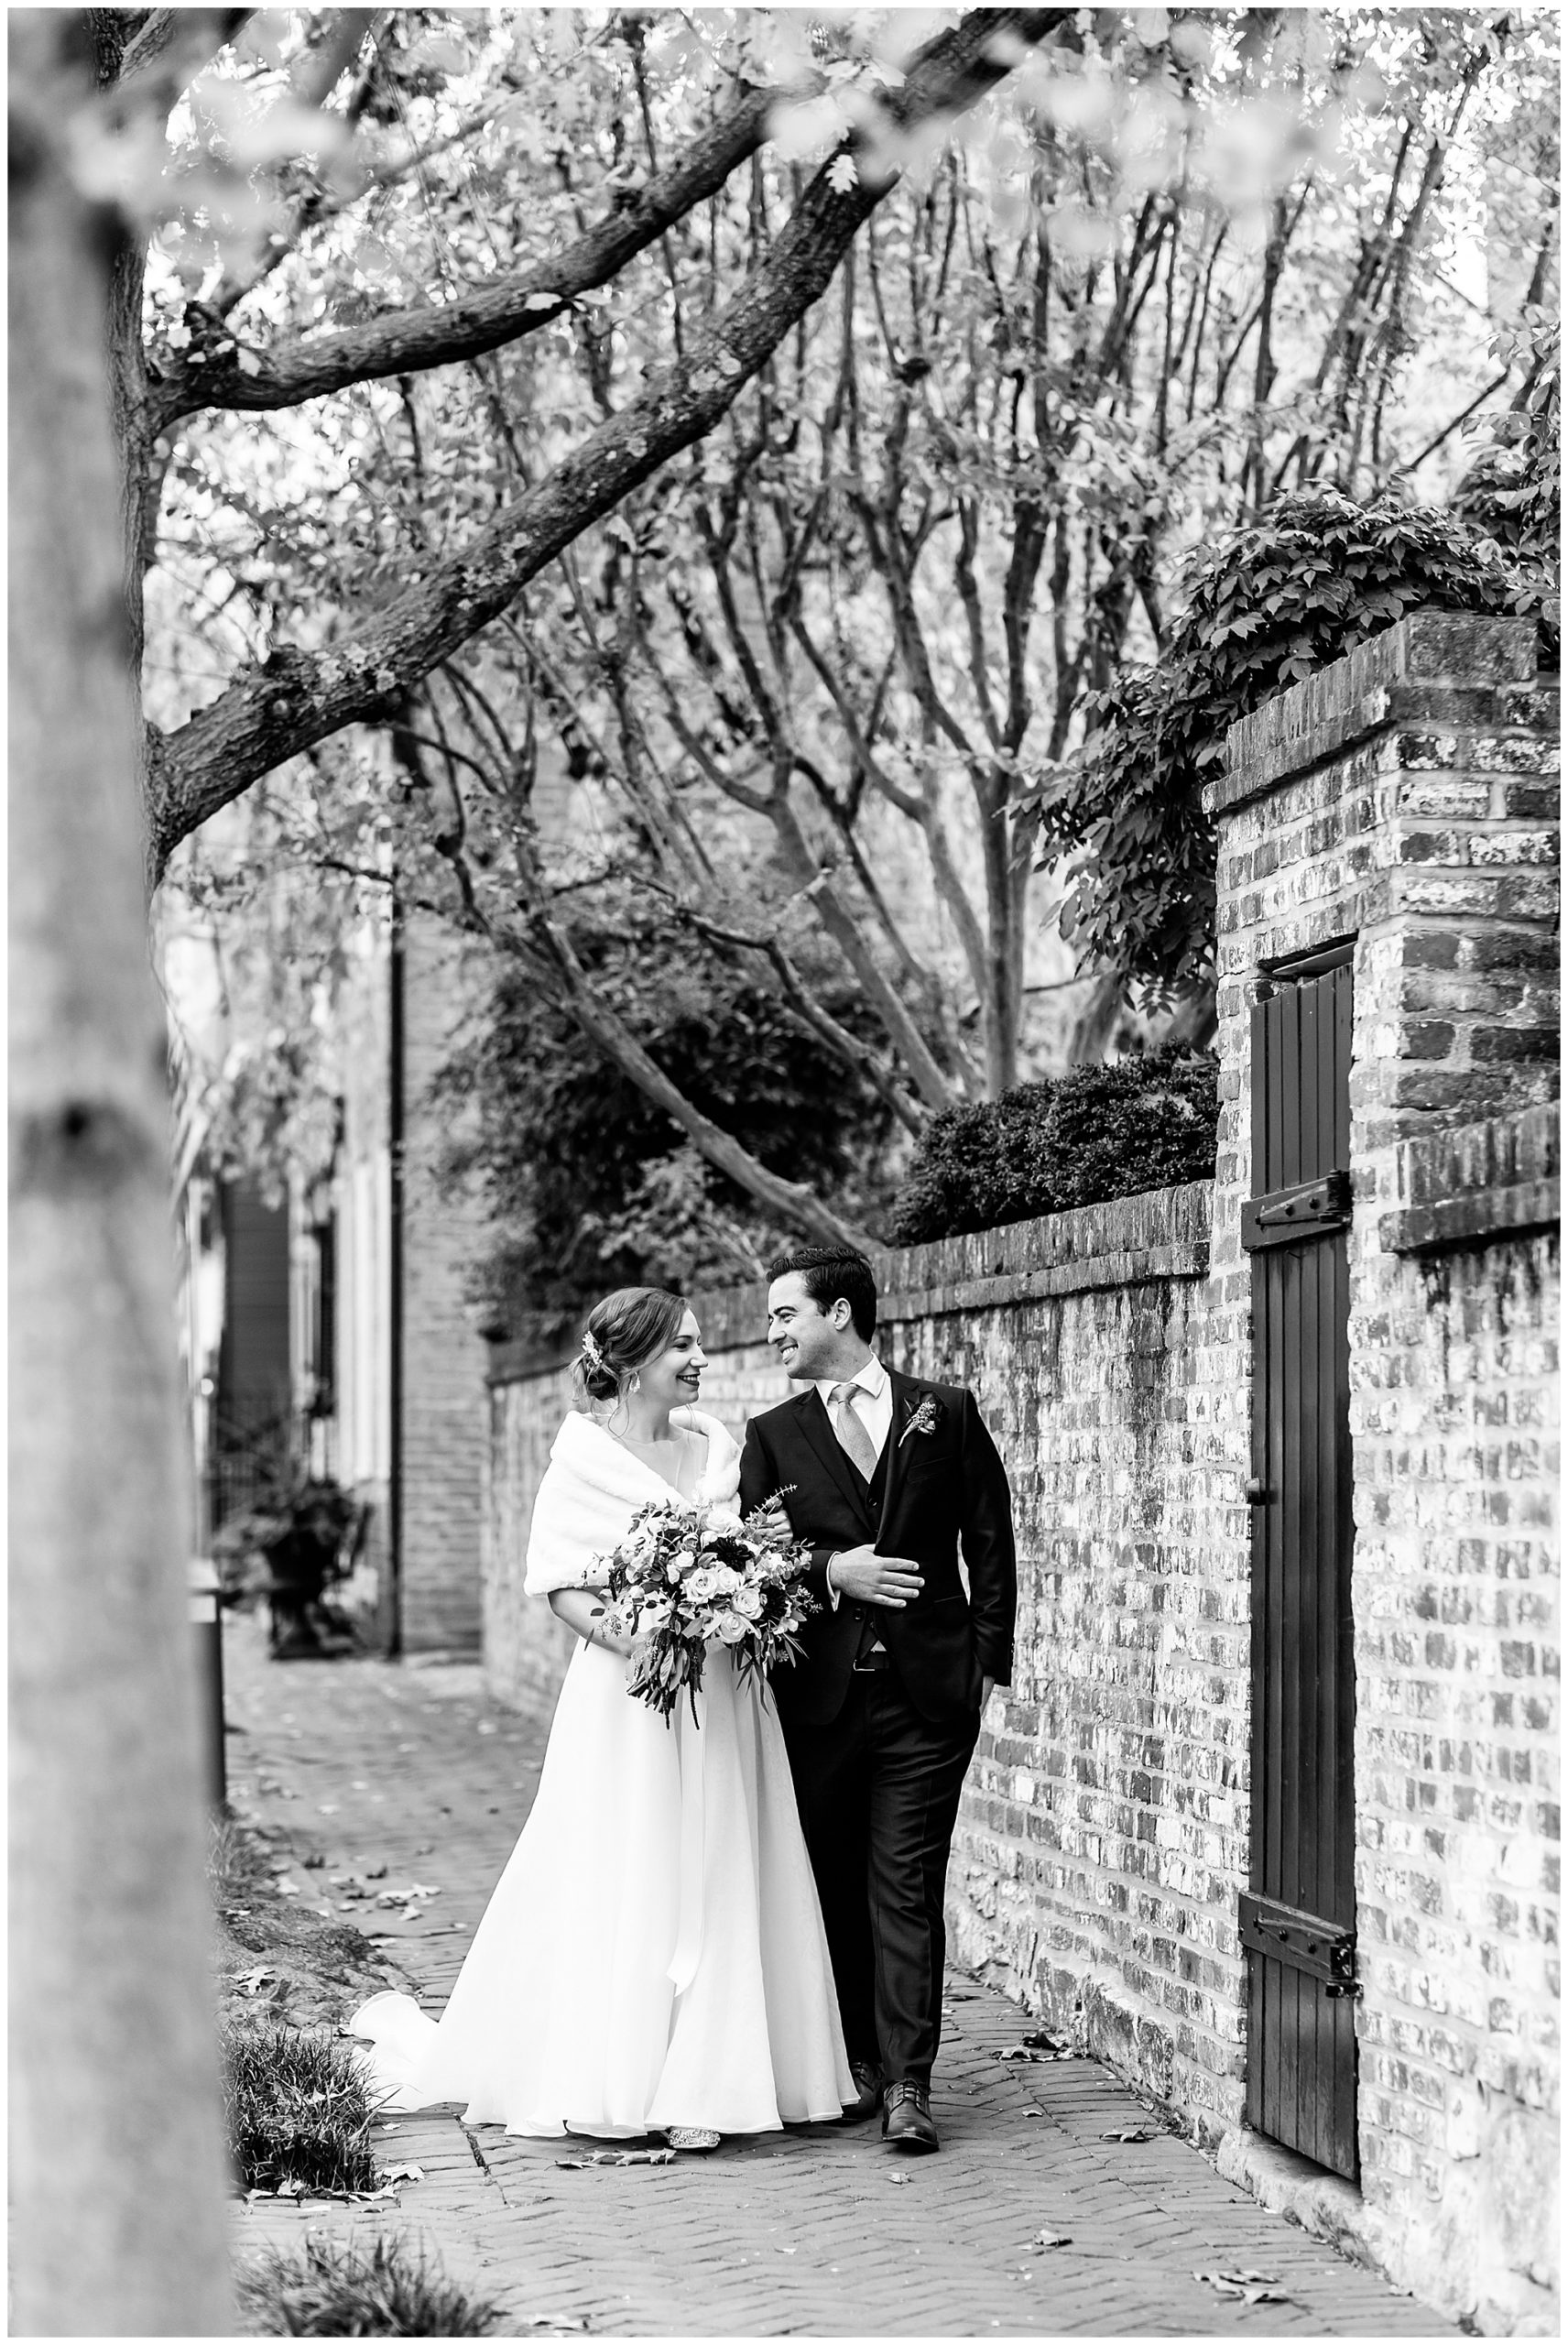 Lorien Alexandria winter wedding, Old Town Alexandria wedding, Alexandria Virginia wedding, DC micro wedding, northern Virginia wedding photographer, Alexandria Virginia wedding photographer, DC wedding photographer, winter wedding aesthetic, Rachel E.H. Photography, black and white, bride and groom walking down sidewalk